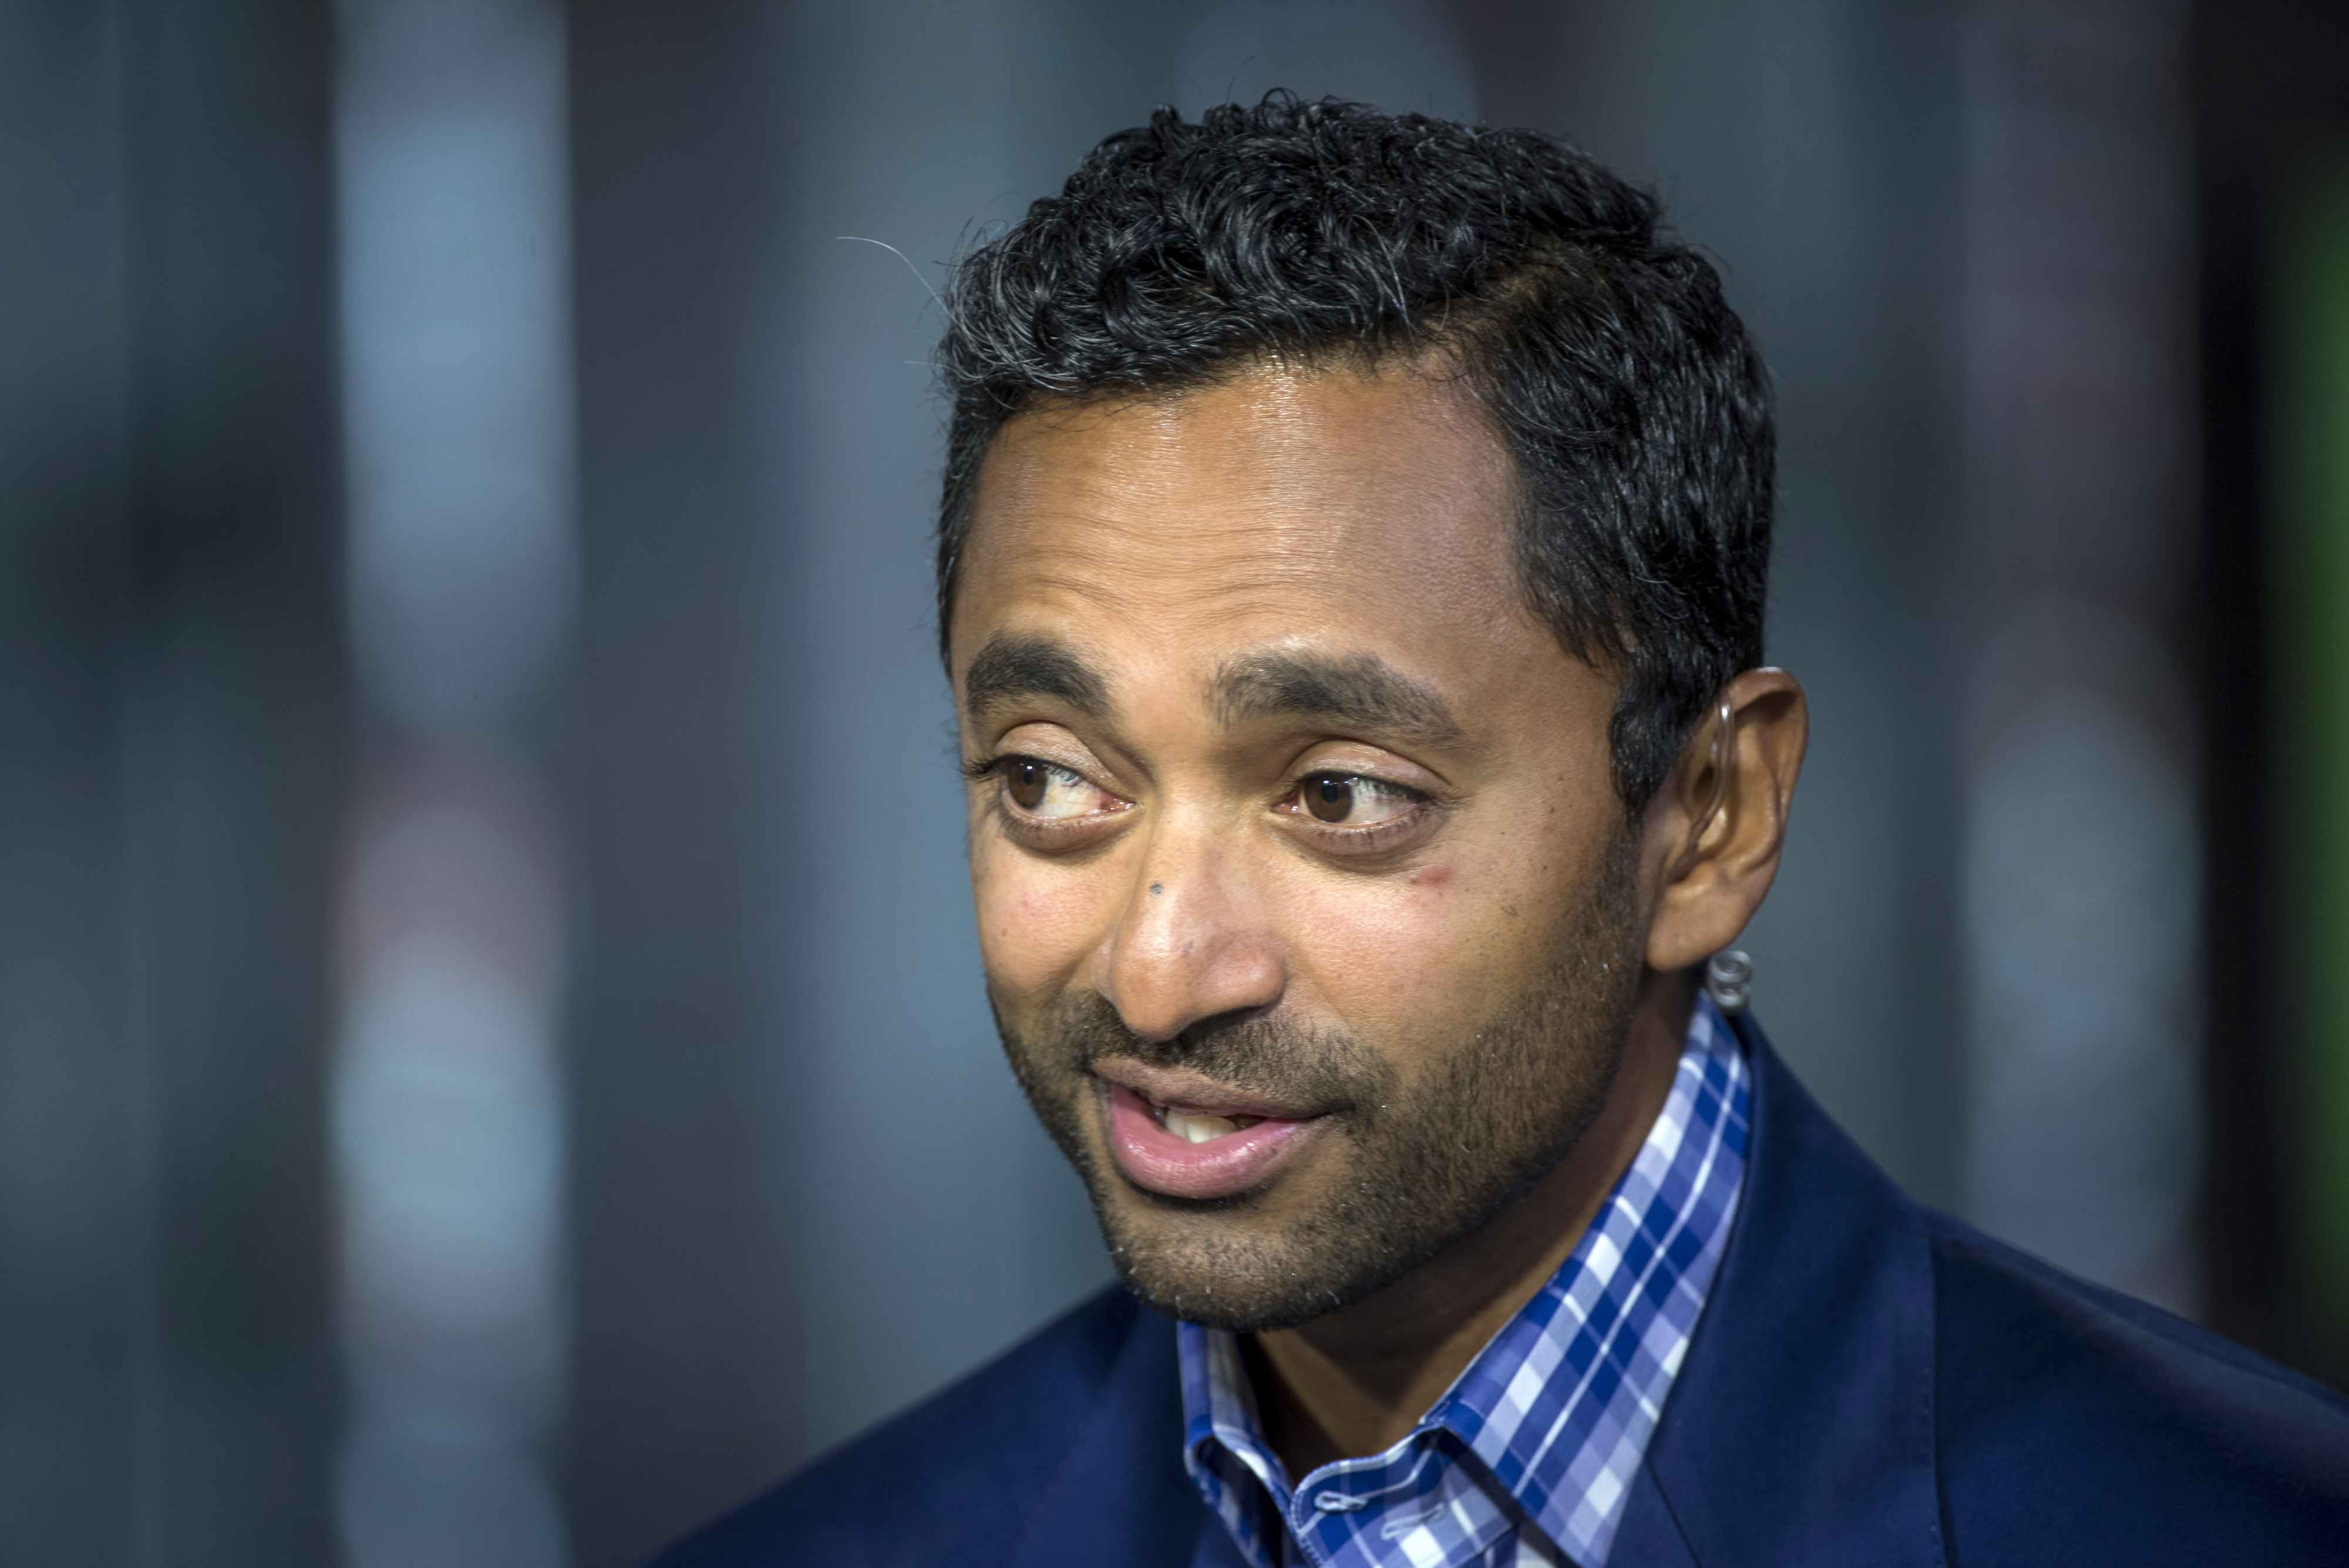 Sri Lankan-Canadian-American venture capitalist, engineer and the founder and CEO of Social Capital Chamath Palihapitiya speaks during an interview